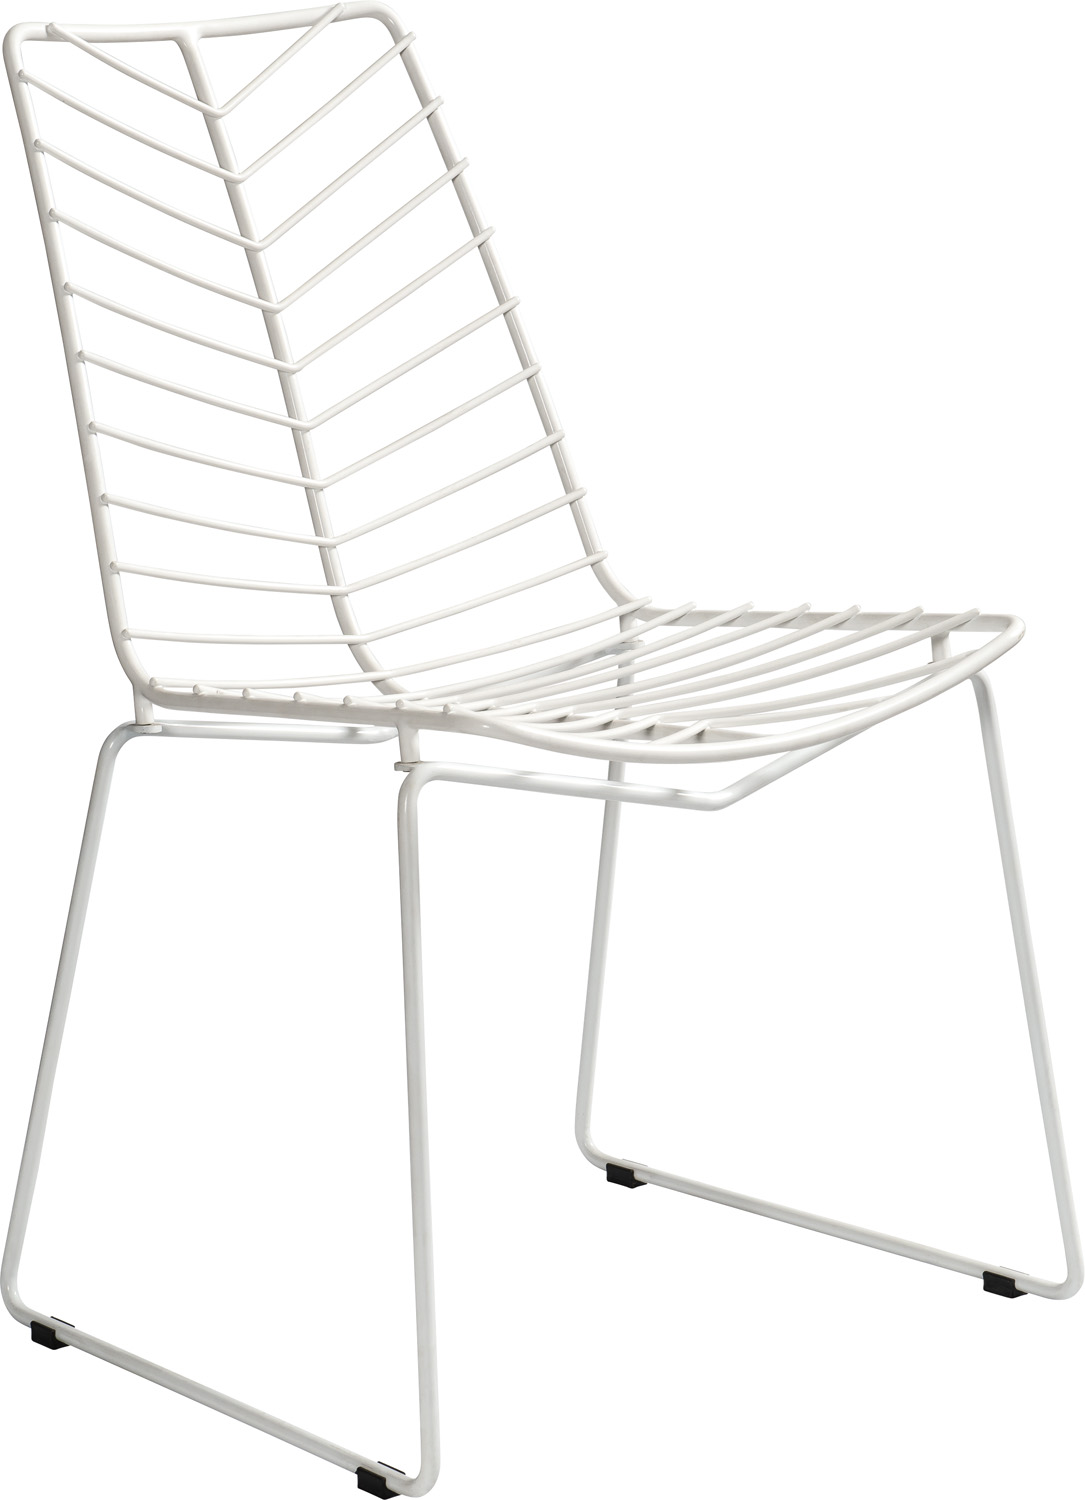 JS-5015 metal wire chair